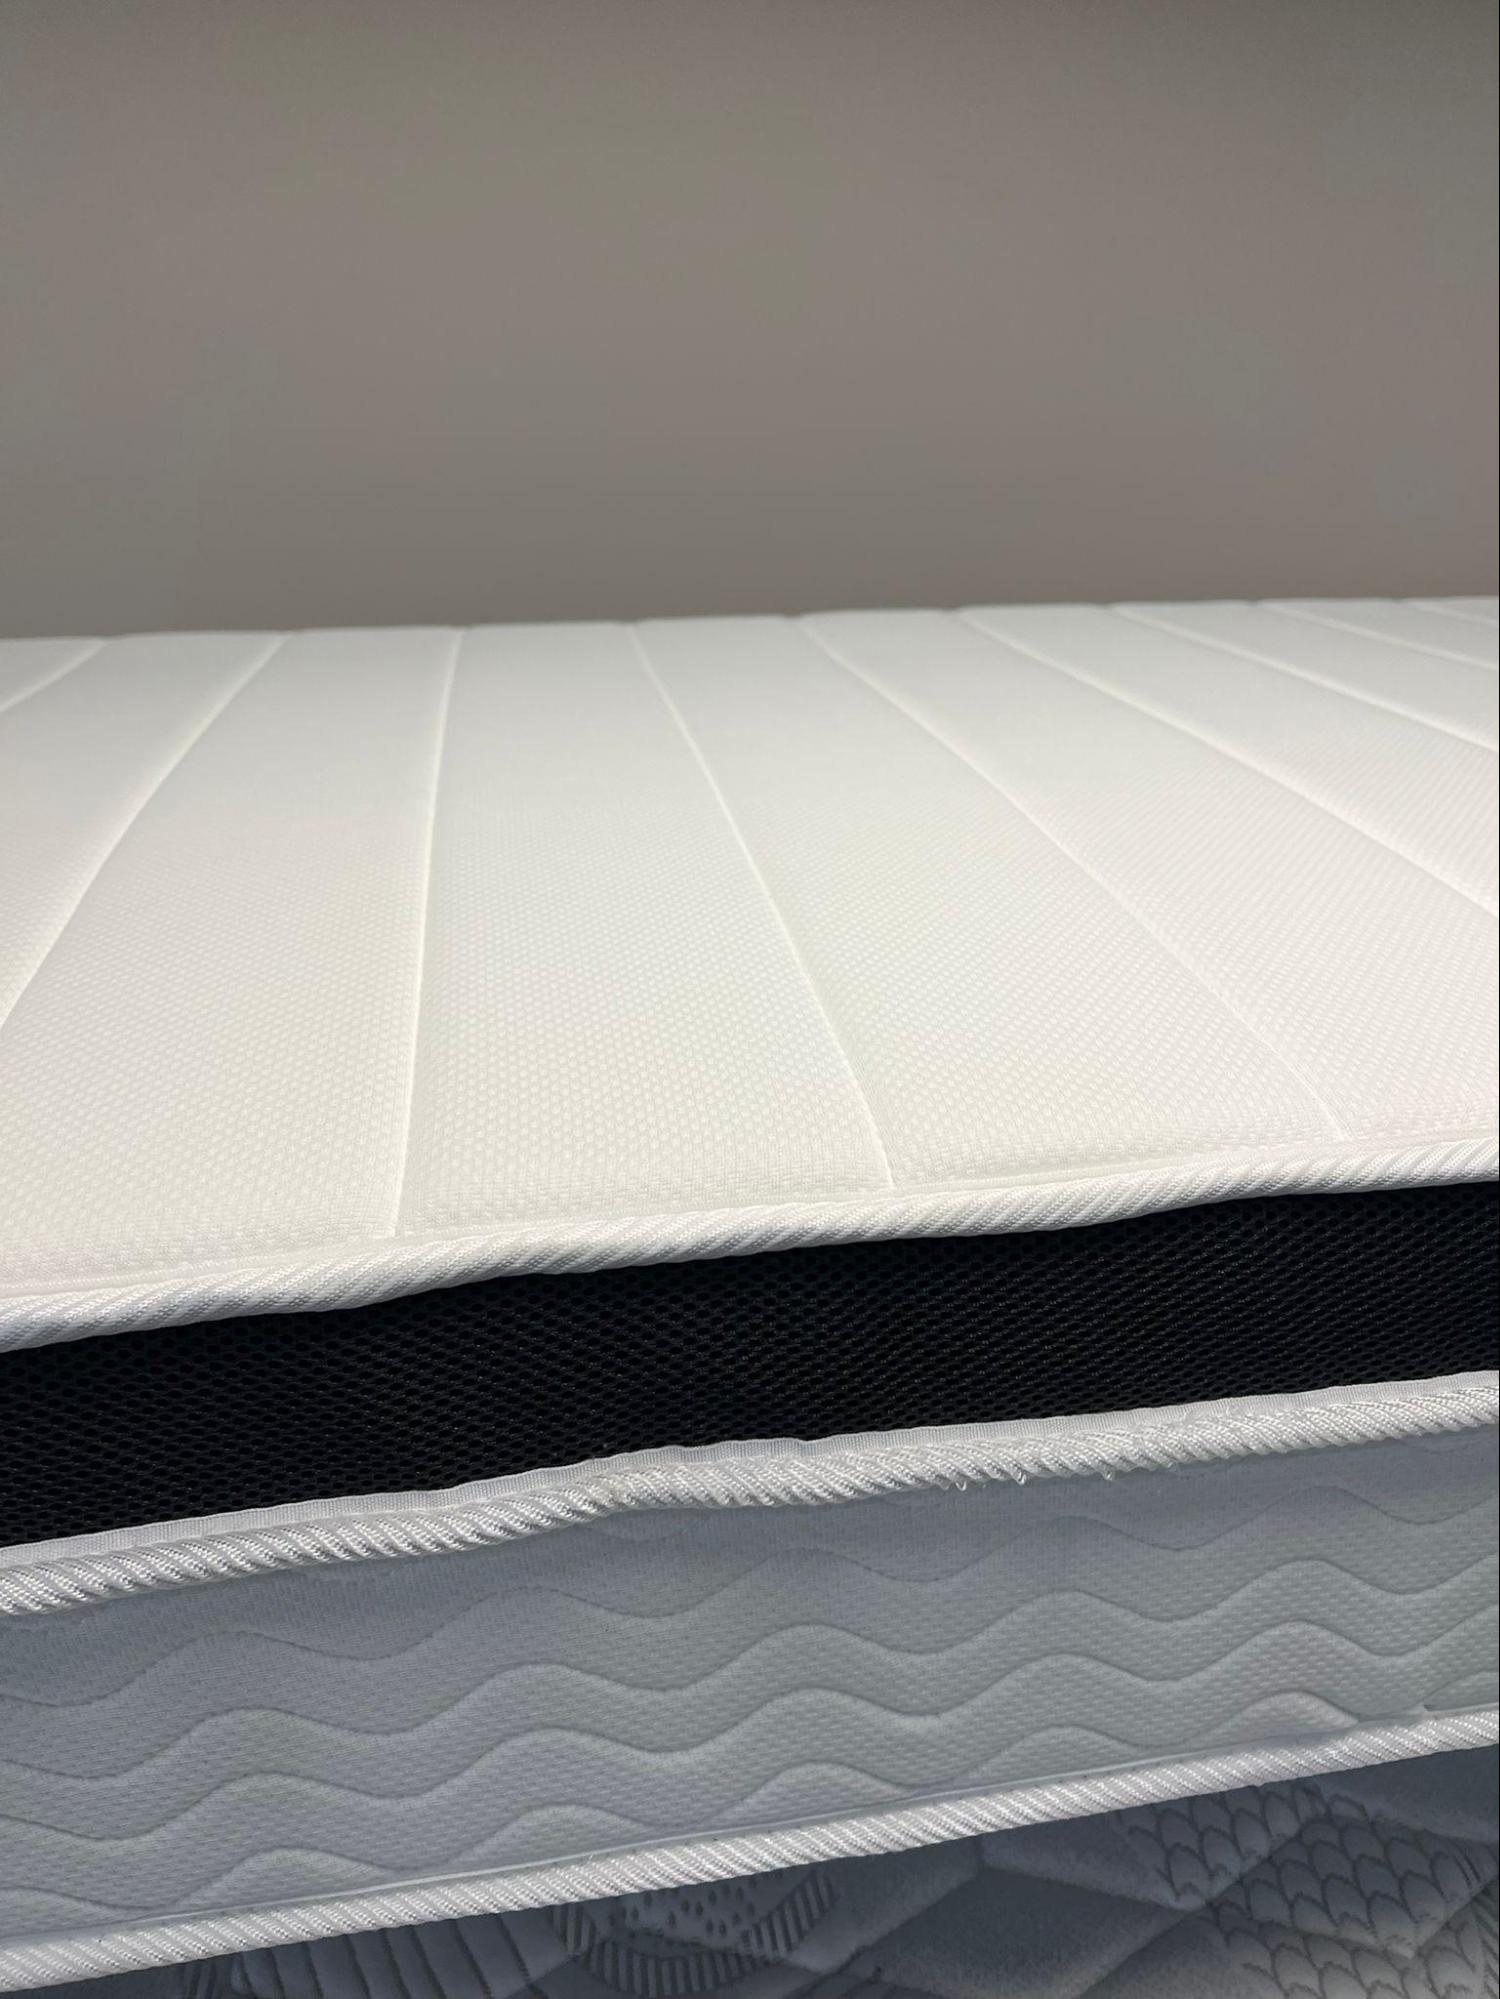 Close-up of fabric patterns on side and top of the mattress